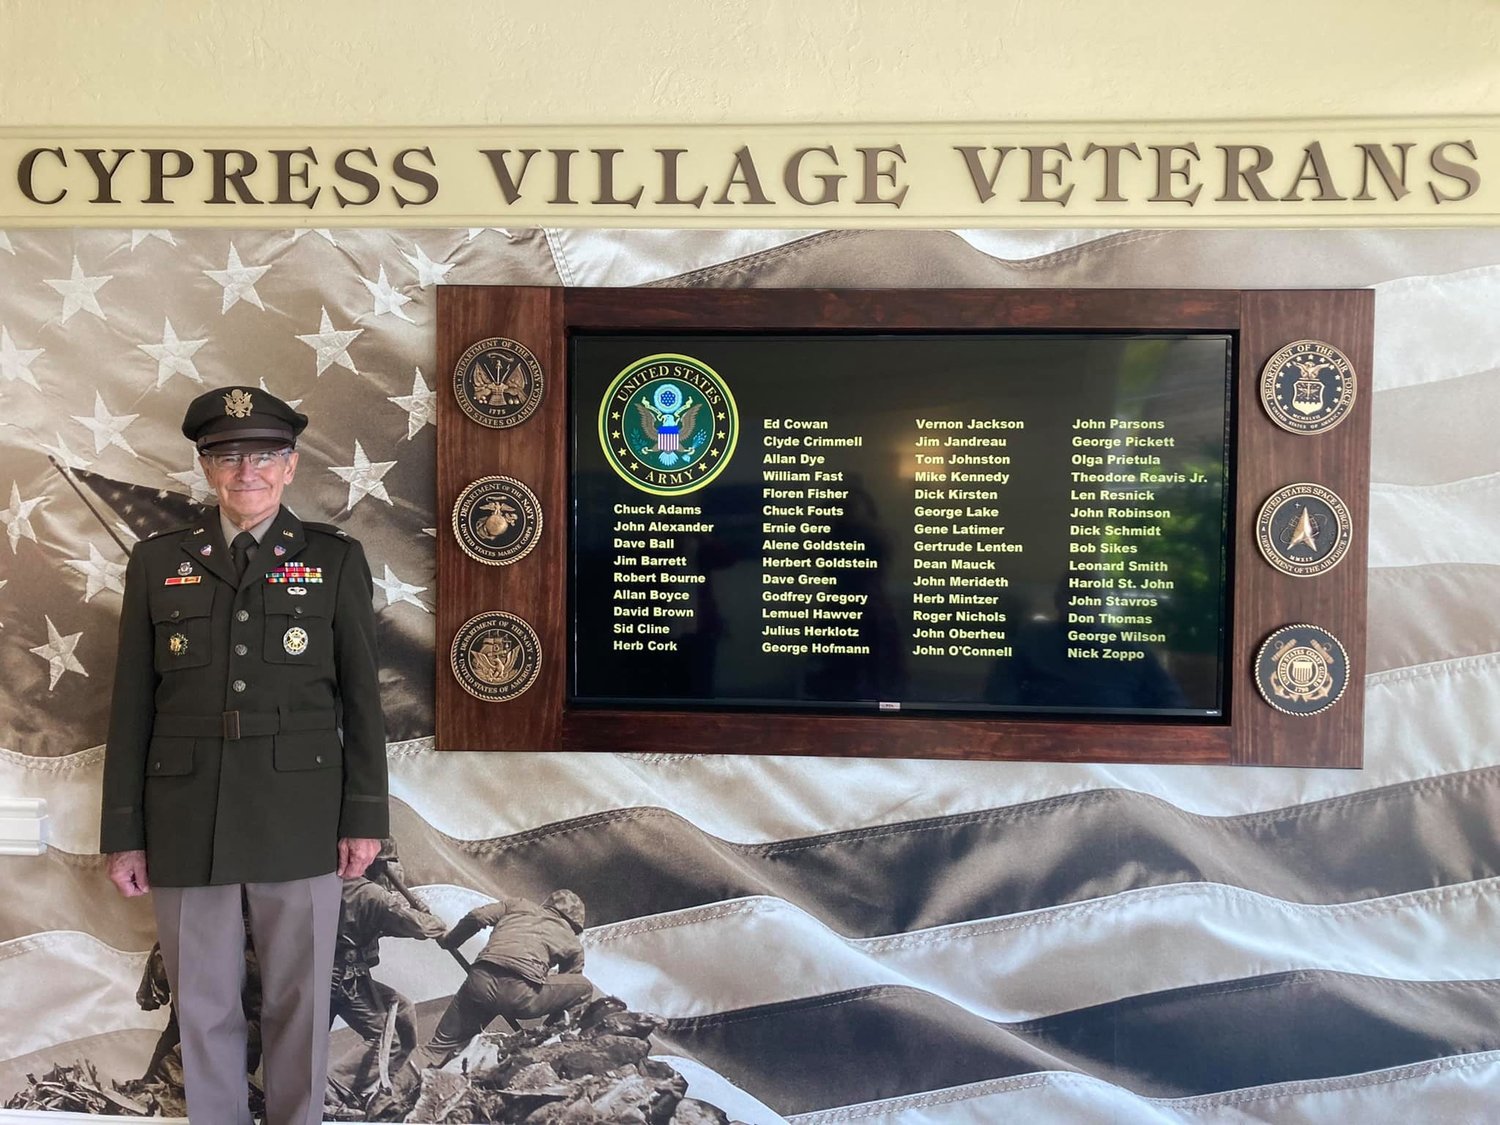 Veterans Committee chair Jim Jandreau stands next to the Veterans Recognition Wall at Cypress Village.